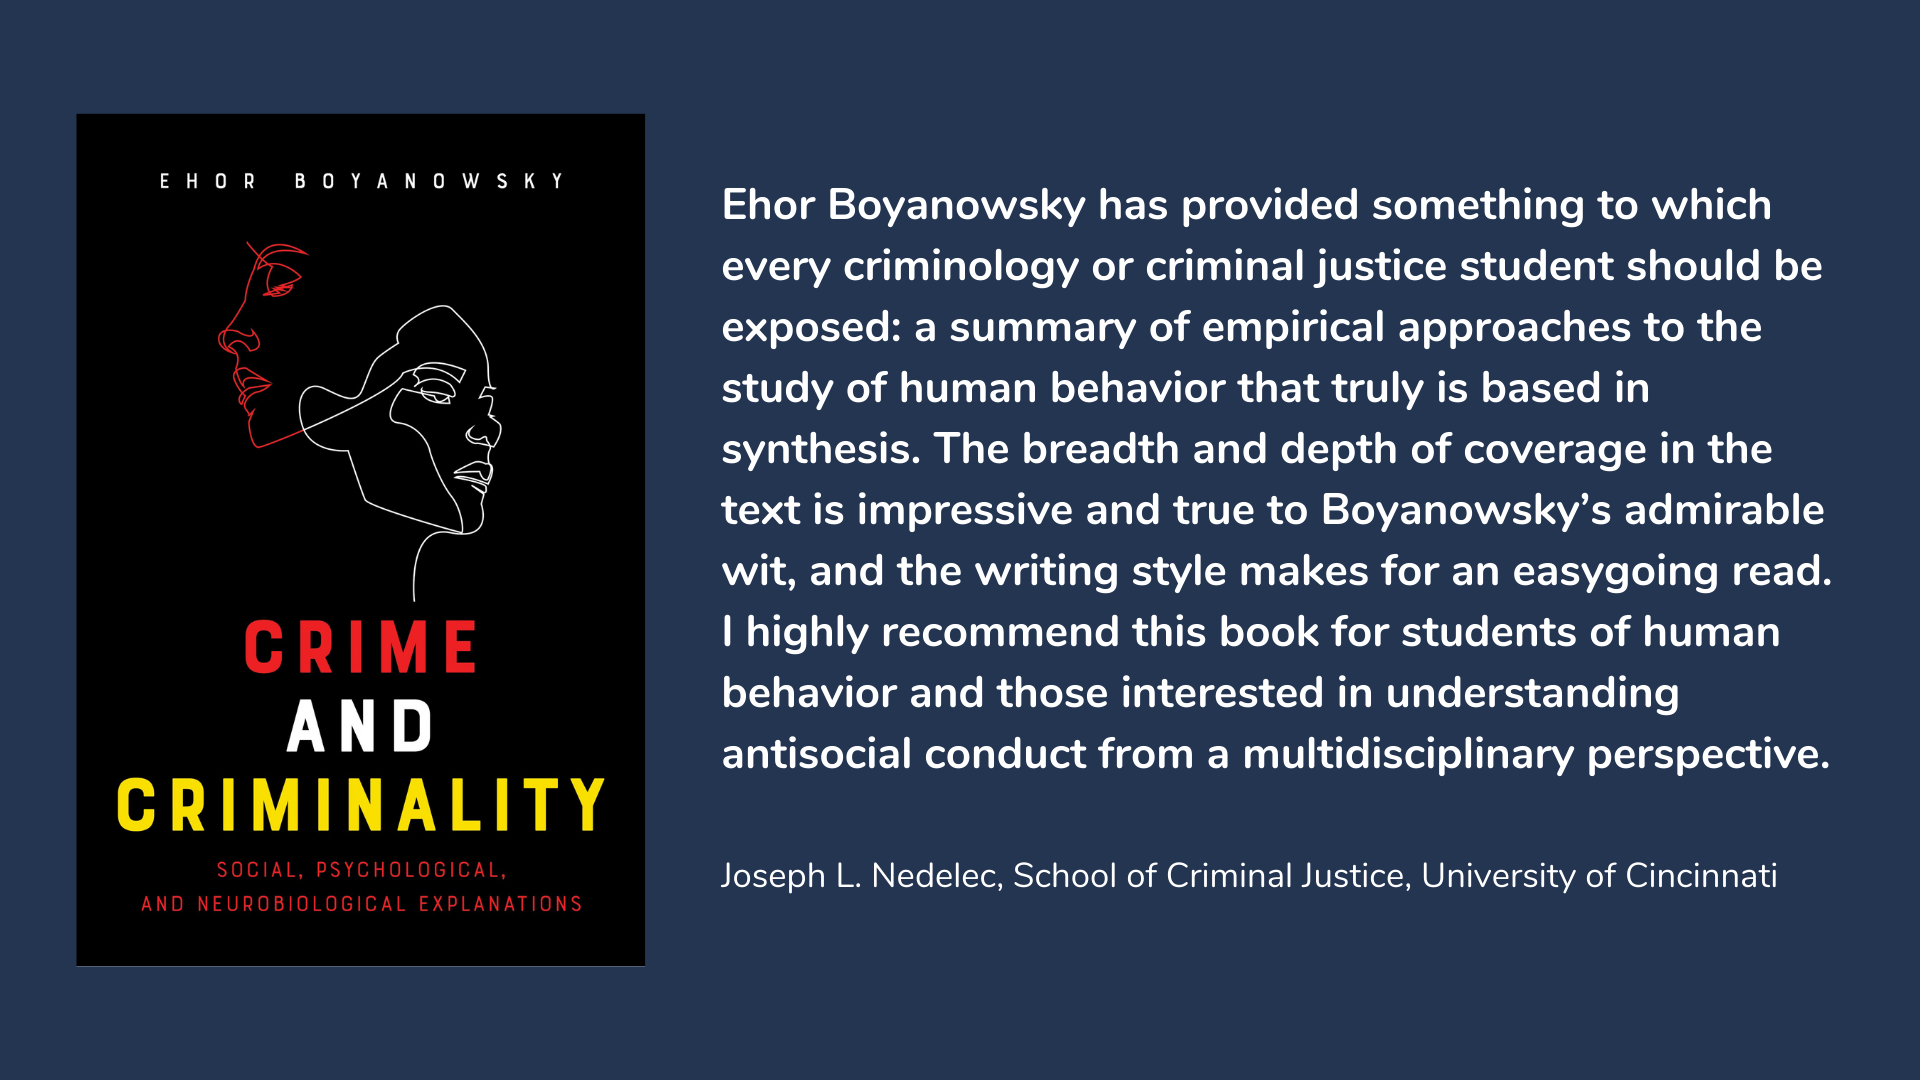 Crime and Criminality: Social, Psychological and Neurobiological Explanations